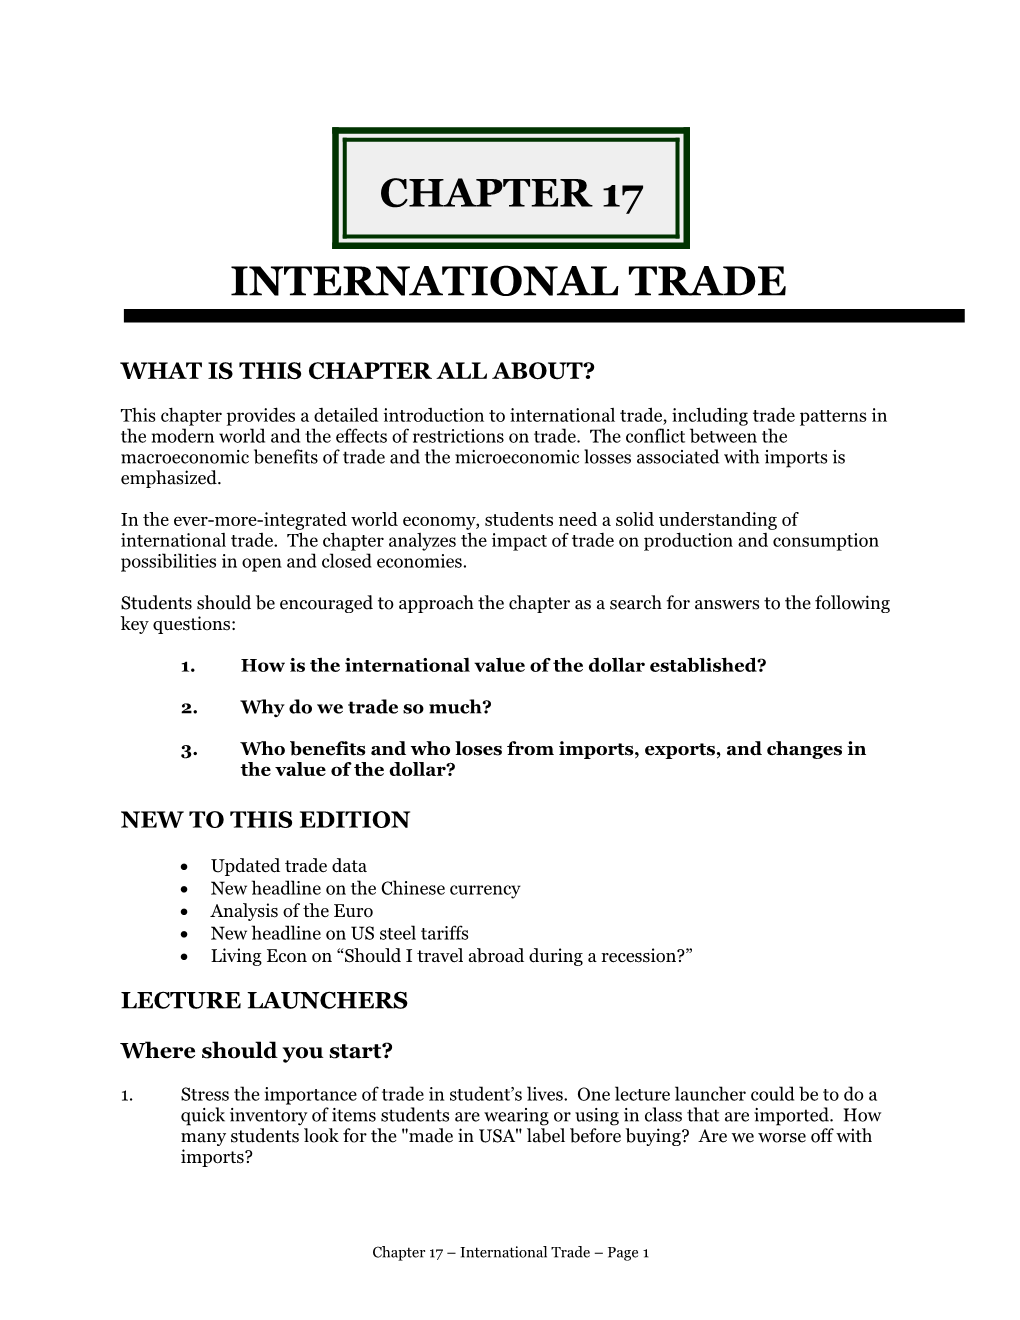 What Is This Chapter All About?